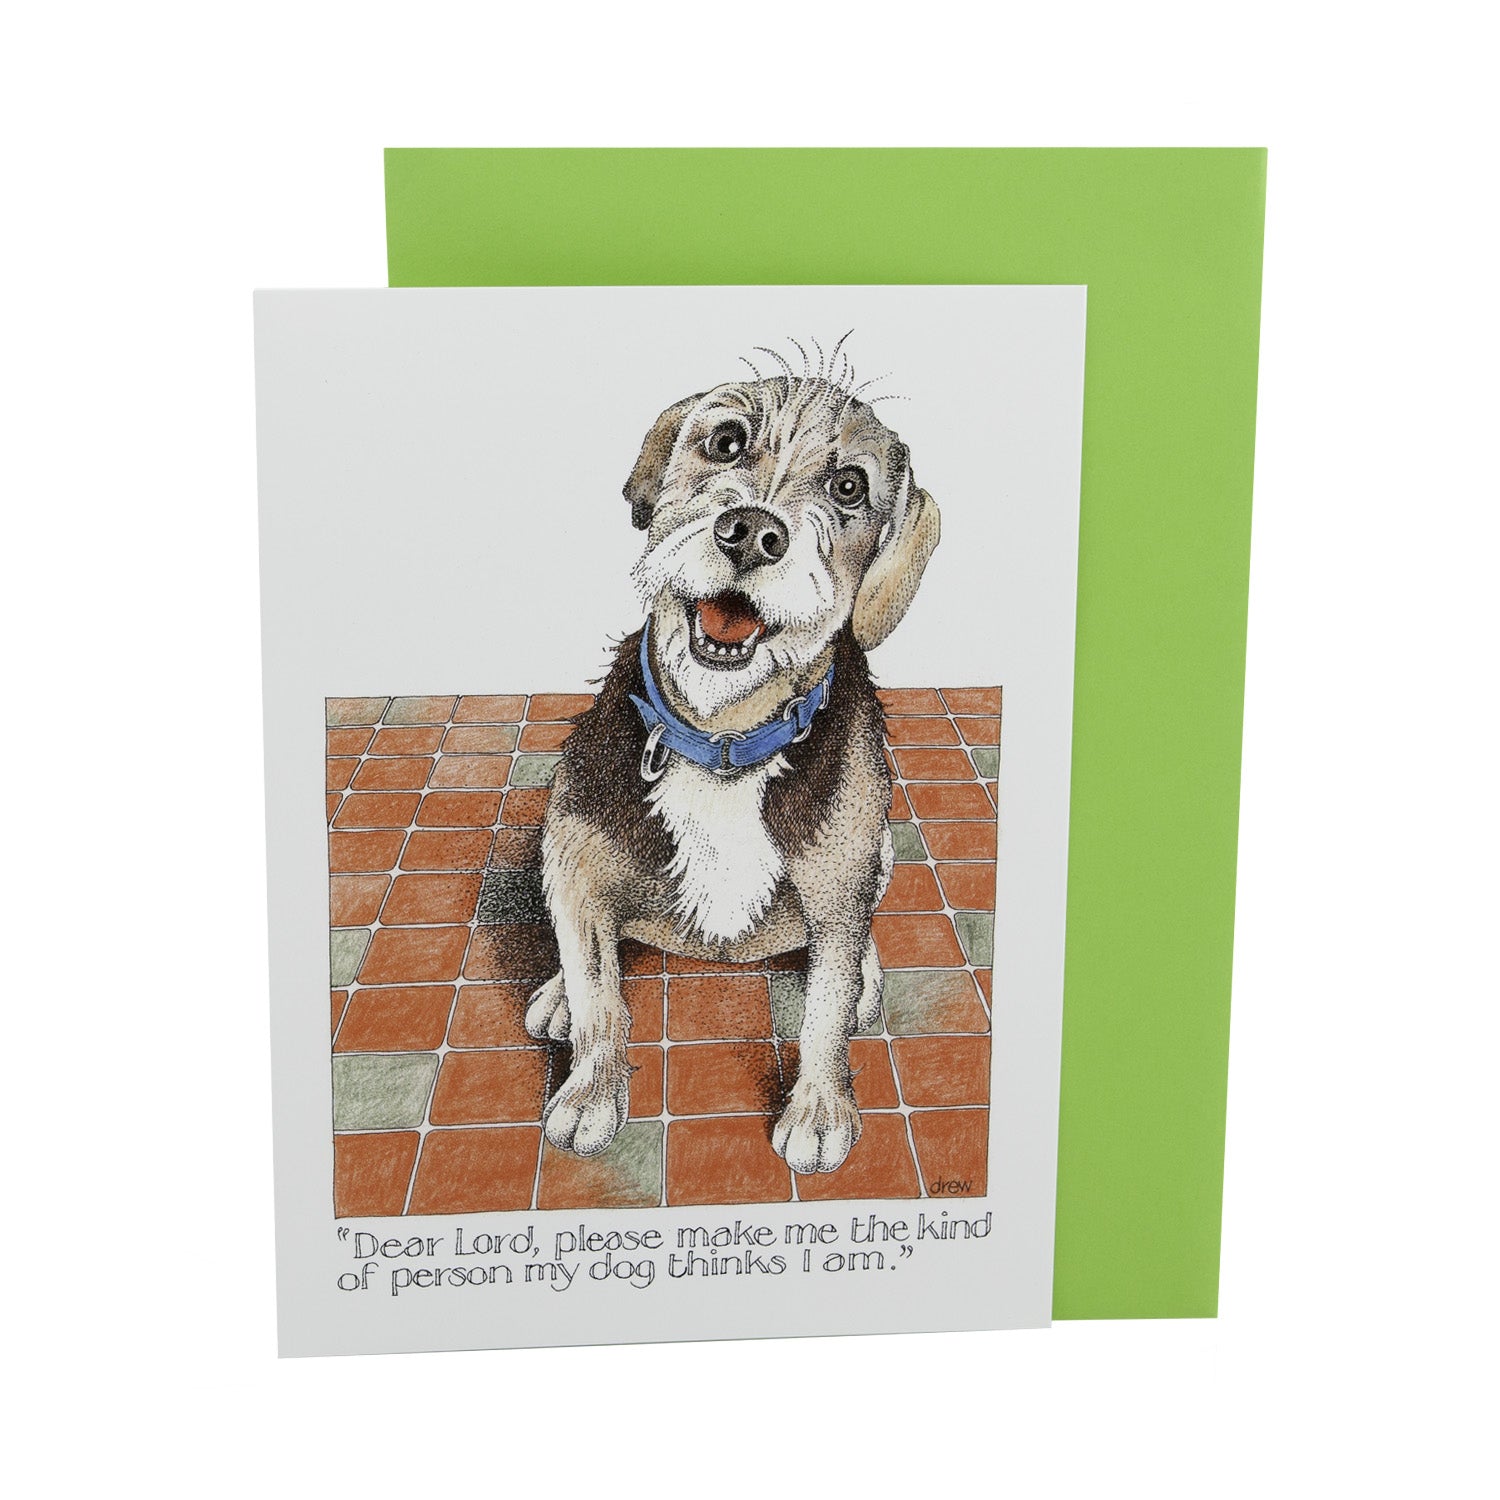 DogKrazyGifts - Dear Lord, Please Make Me Card - Part of the Simon Drew dog collection available from Dog Krazy Gifts